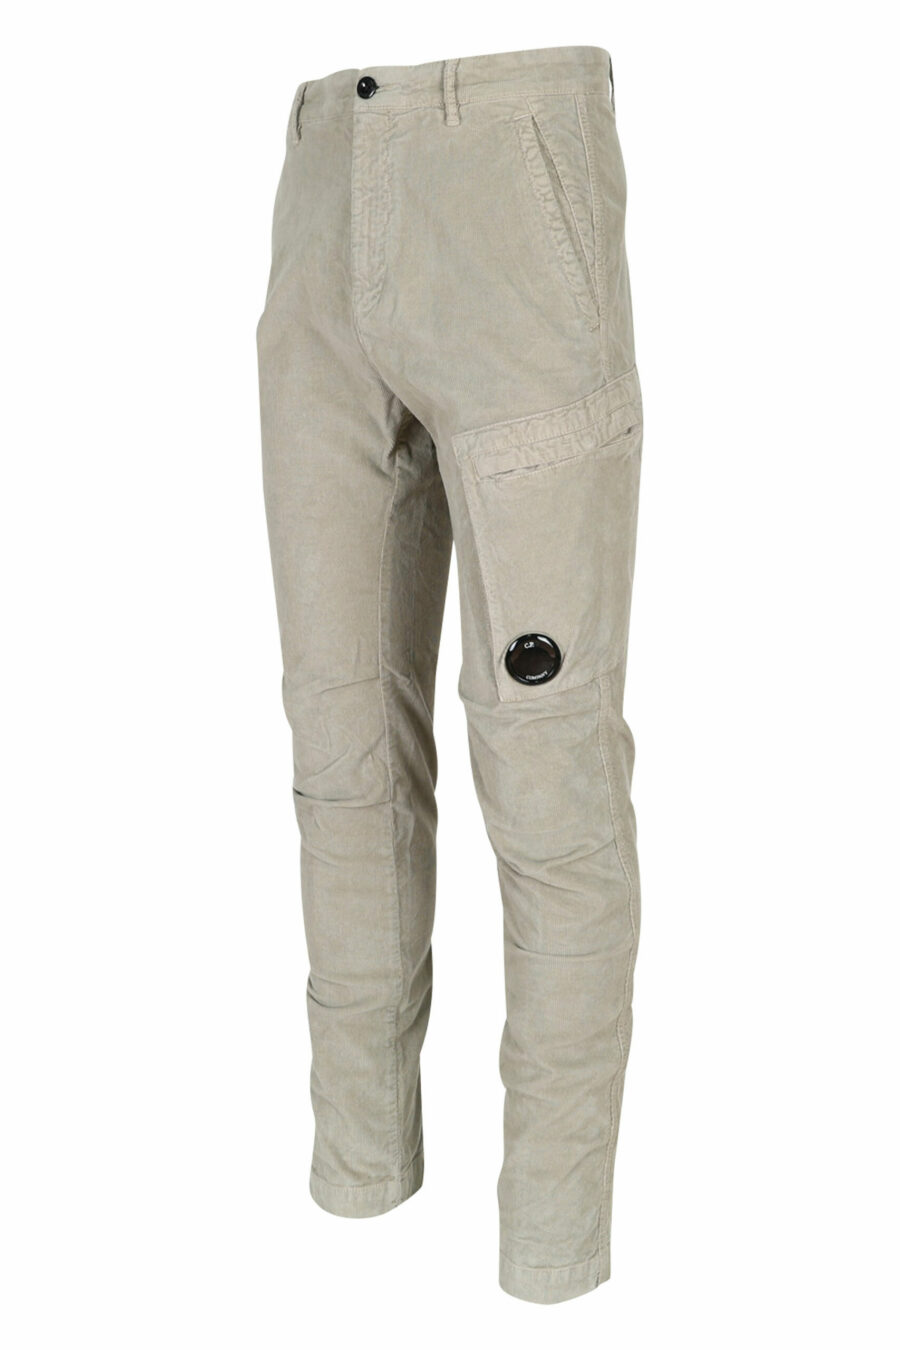 Beige corduroy trousers with side pocket and lens logo - 7620943650518 2 scaled